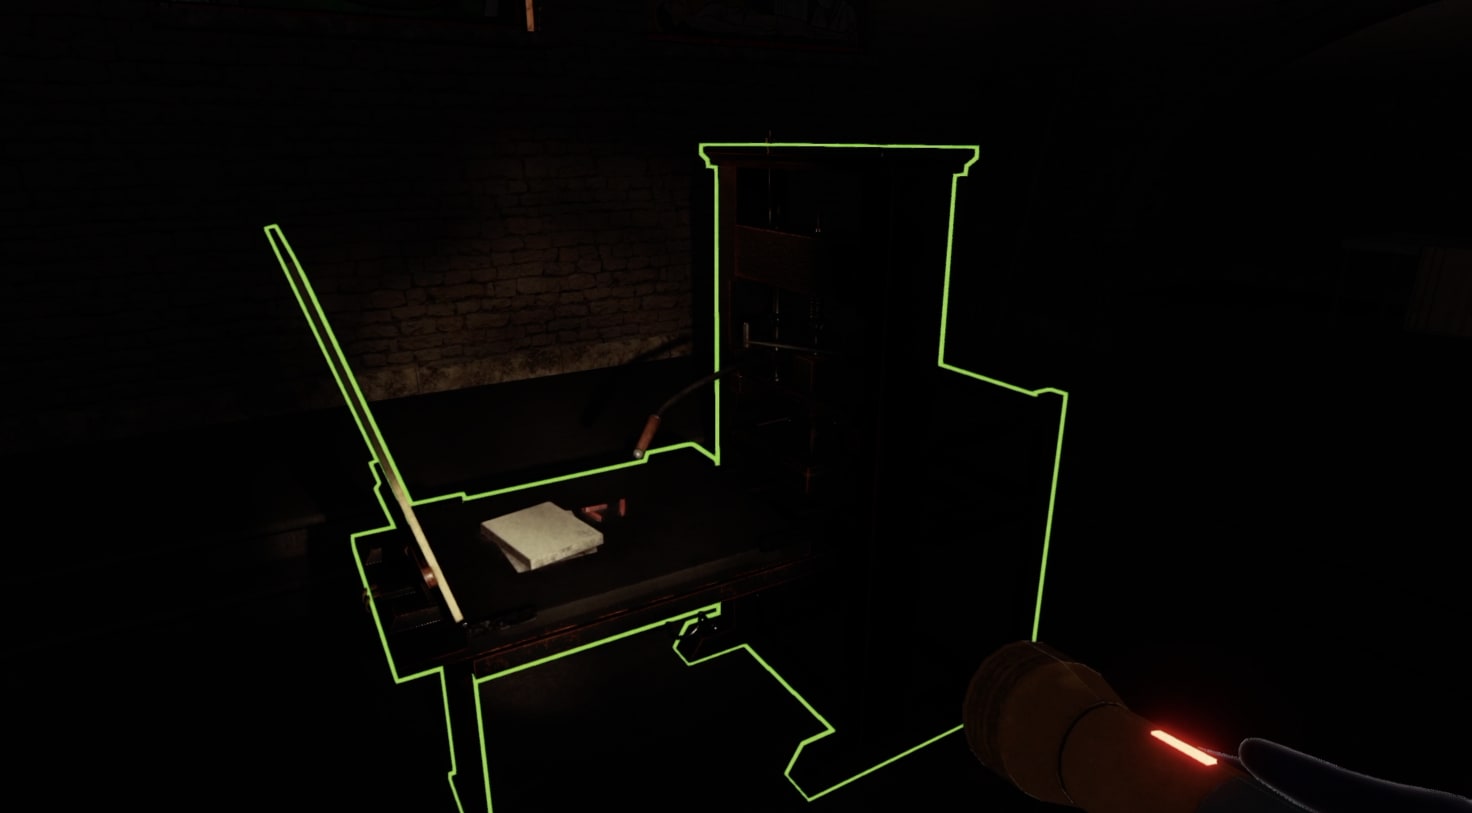 In-game screenshot focusing on the old fashioned printing press in the centre of the lower half of The Mine. The room is dark, perspective limited by the reach of the torchlight. The little light there is picks out a large metal printing press, details obscure but form clearly identifiable. The printing press itself is further outlined with a neon green line, indicating to a user of the game that it is an interactive object.